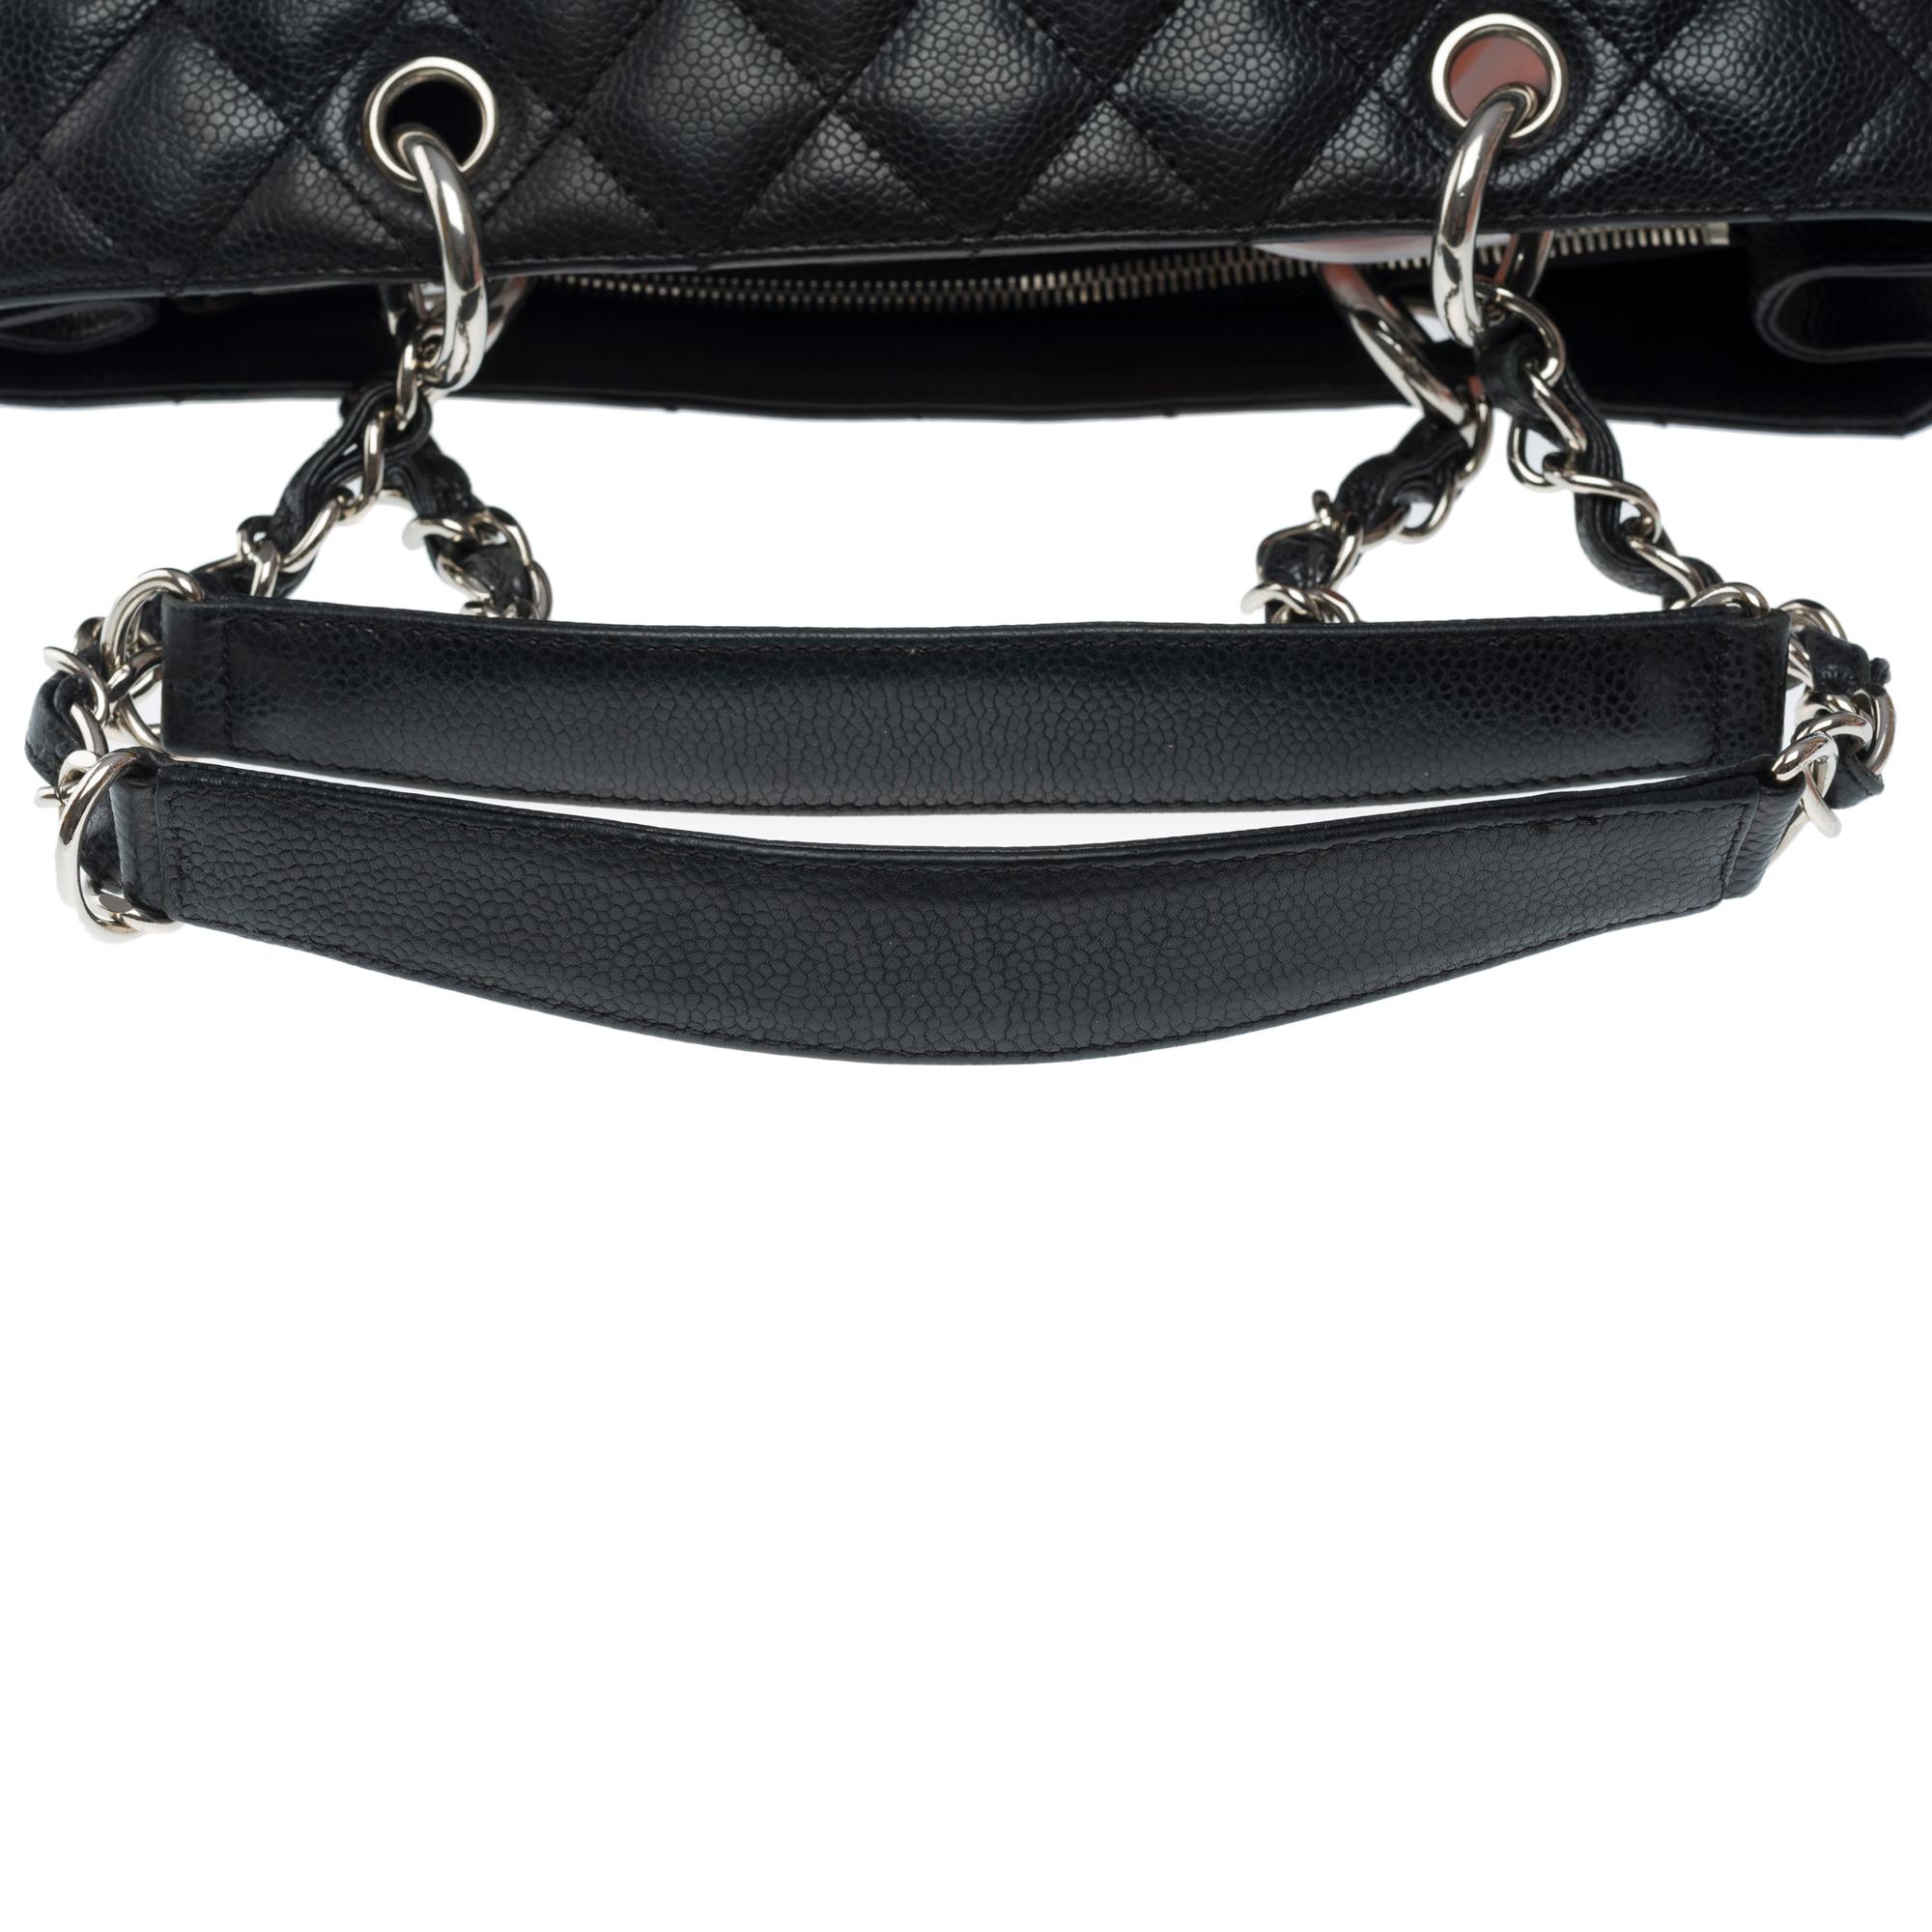  Chanel Grand Shopping Tote bag (GST) in black Caviar quilted leather, SHW For Sale 5